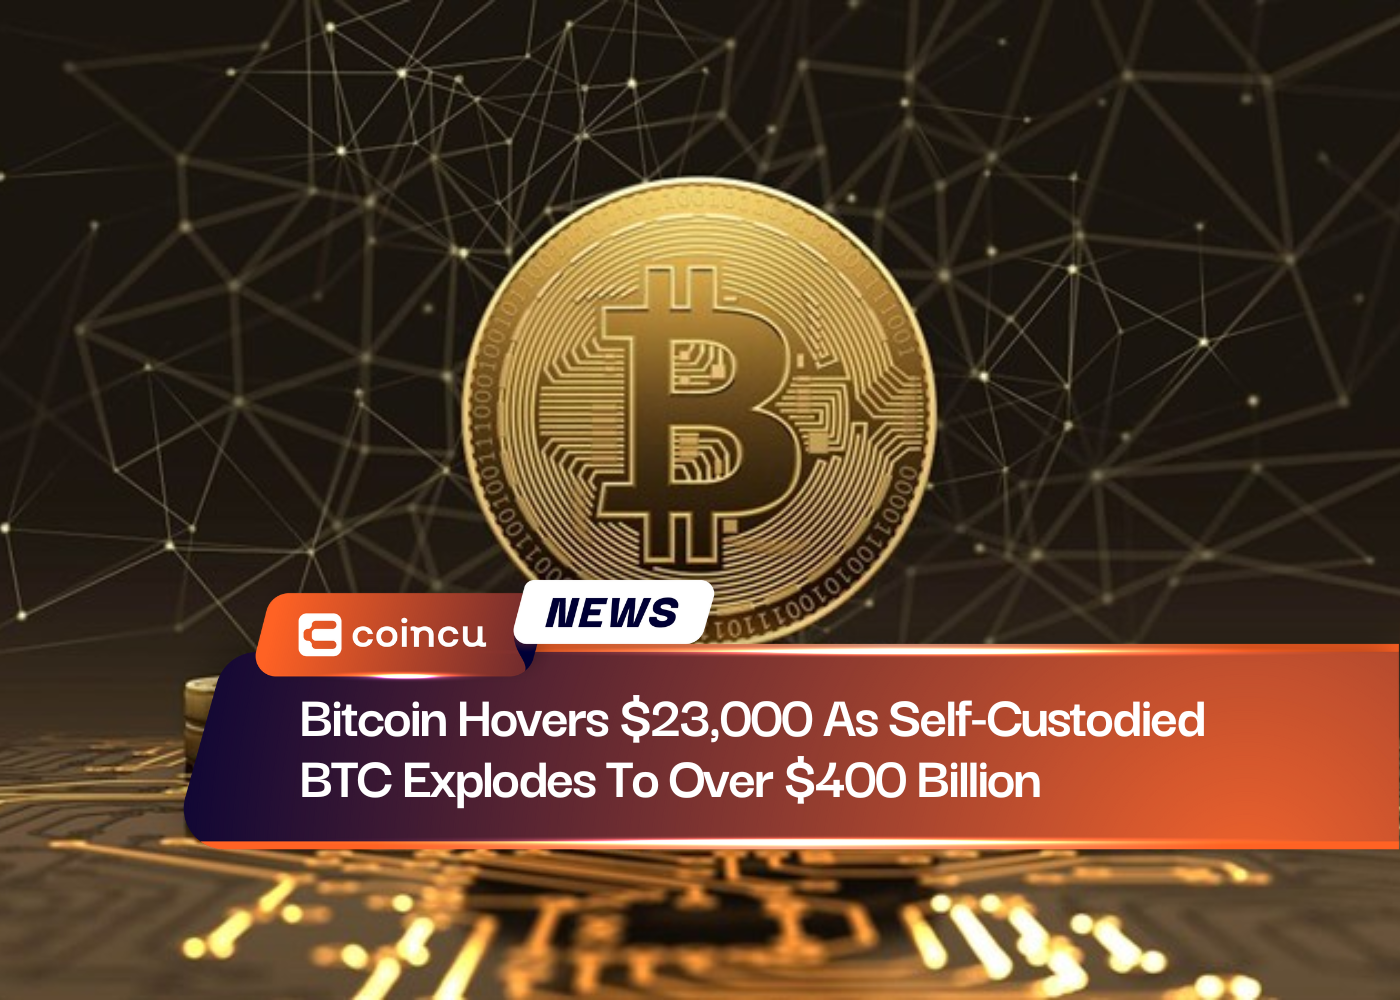 Bitcoin Hovers $23,000 As Self-Custodied BTC Explodes To Over $400 Billion